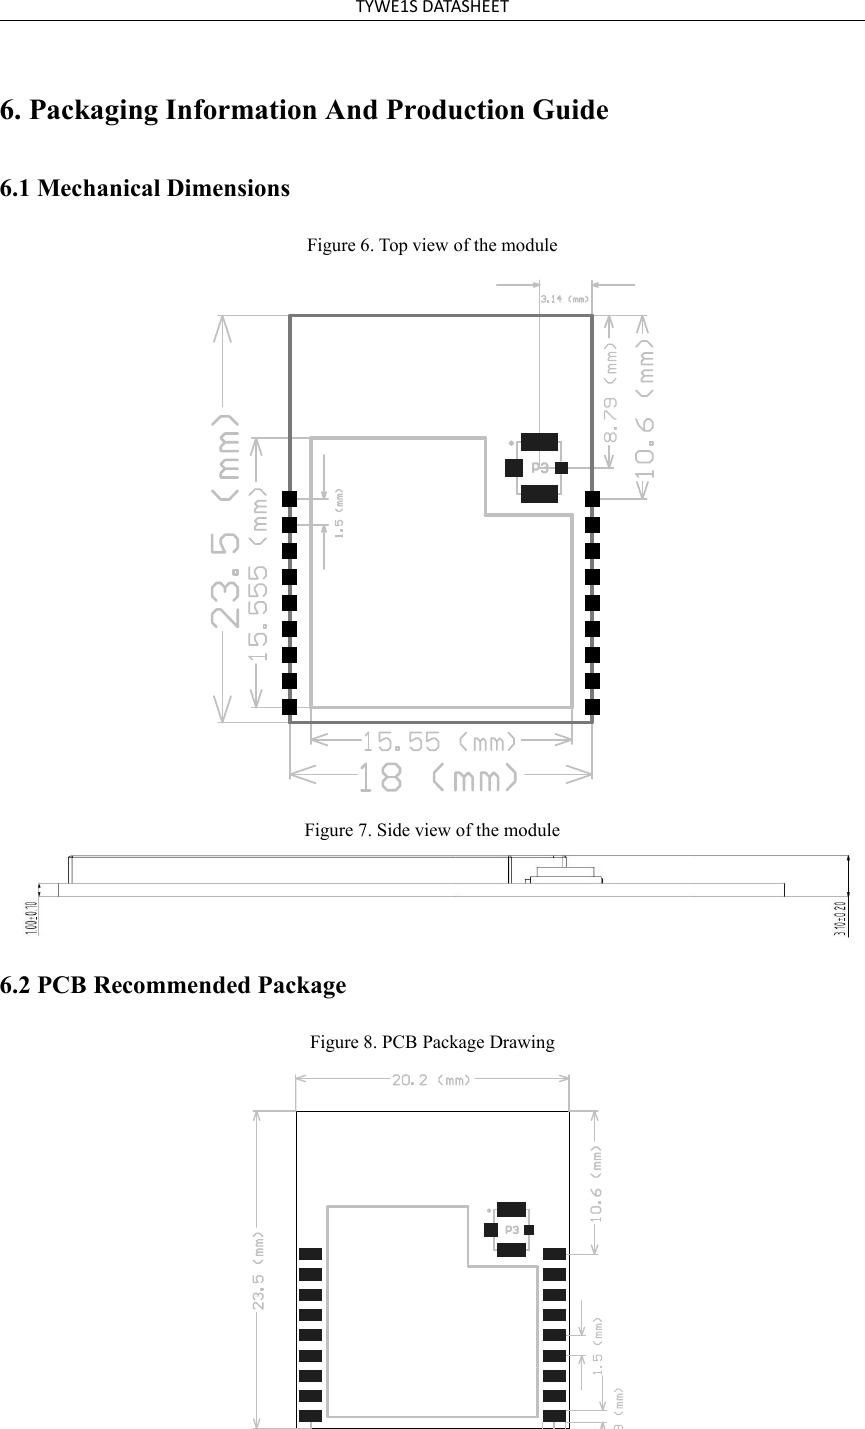 TYWE1S DATASHEET6. Packaging Information And Production Guide6.1 Mechanical DimensionsFigure 6. Top view of the moduleFigure 7. Side view of the module6.2 PCB Recommended PackageFigure 8. PCB Package Drawing